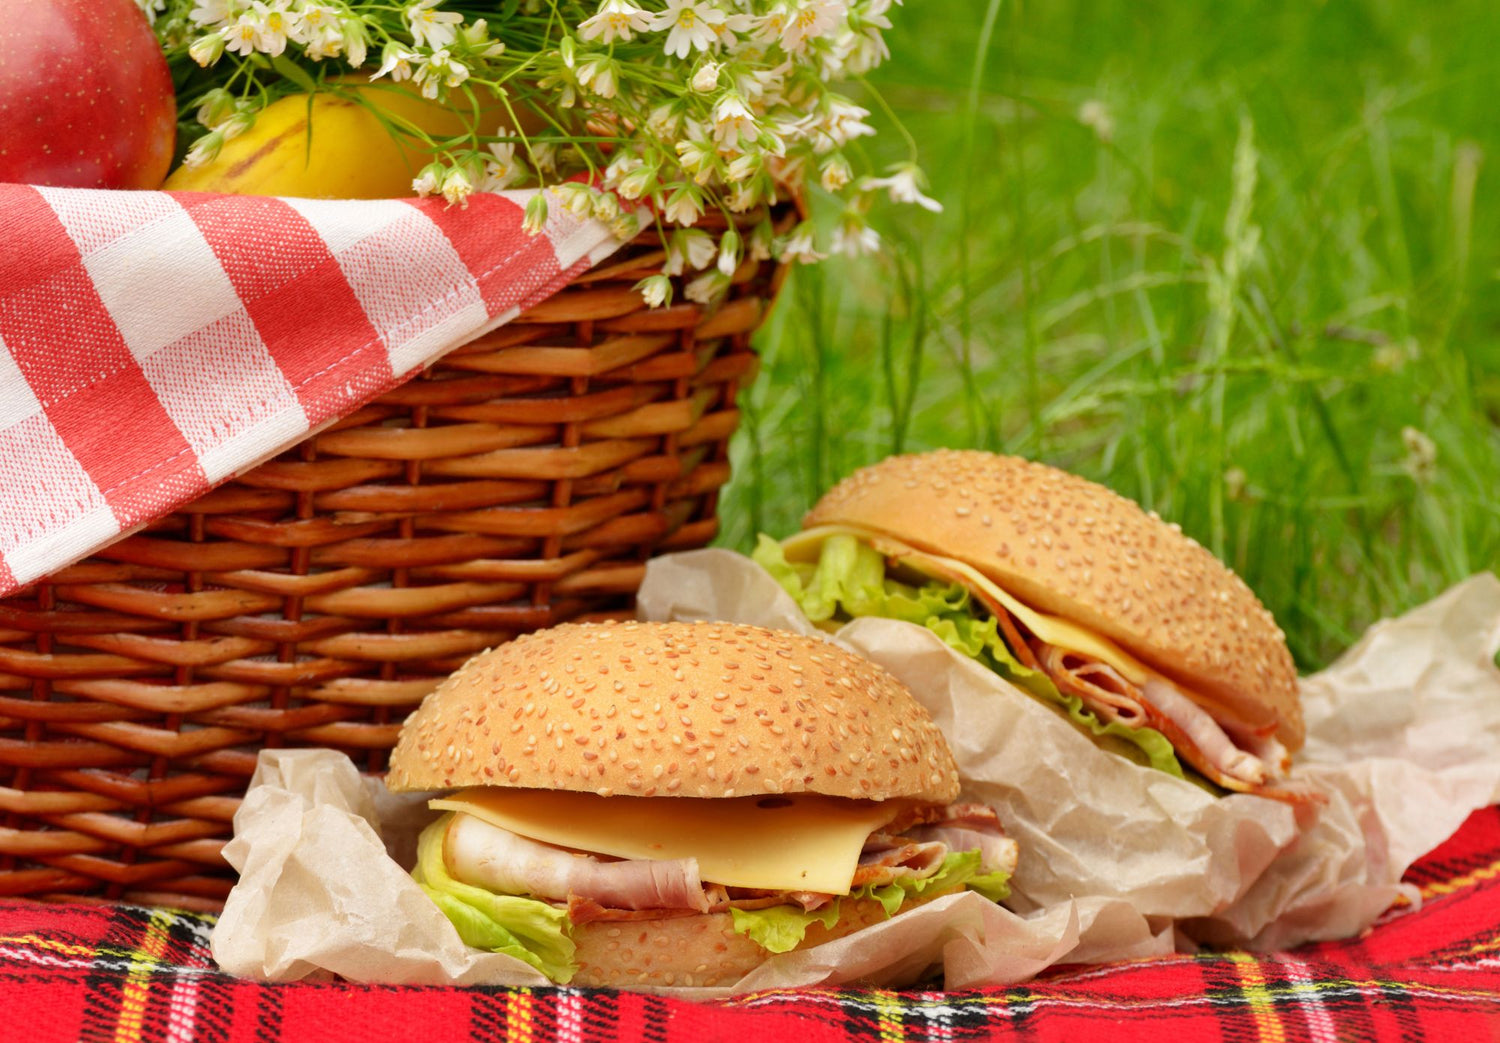 Picnic Perfect: Packable and Delicious Foods for Outdoor Dining